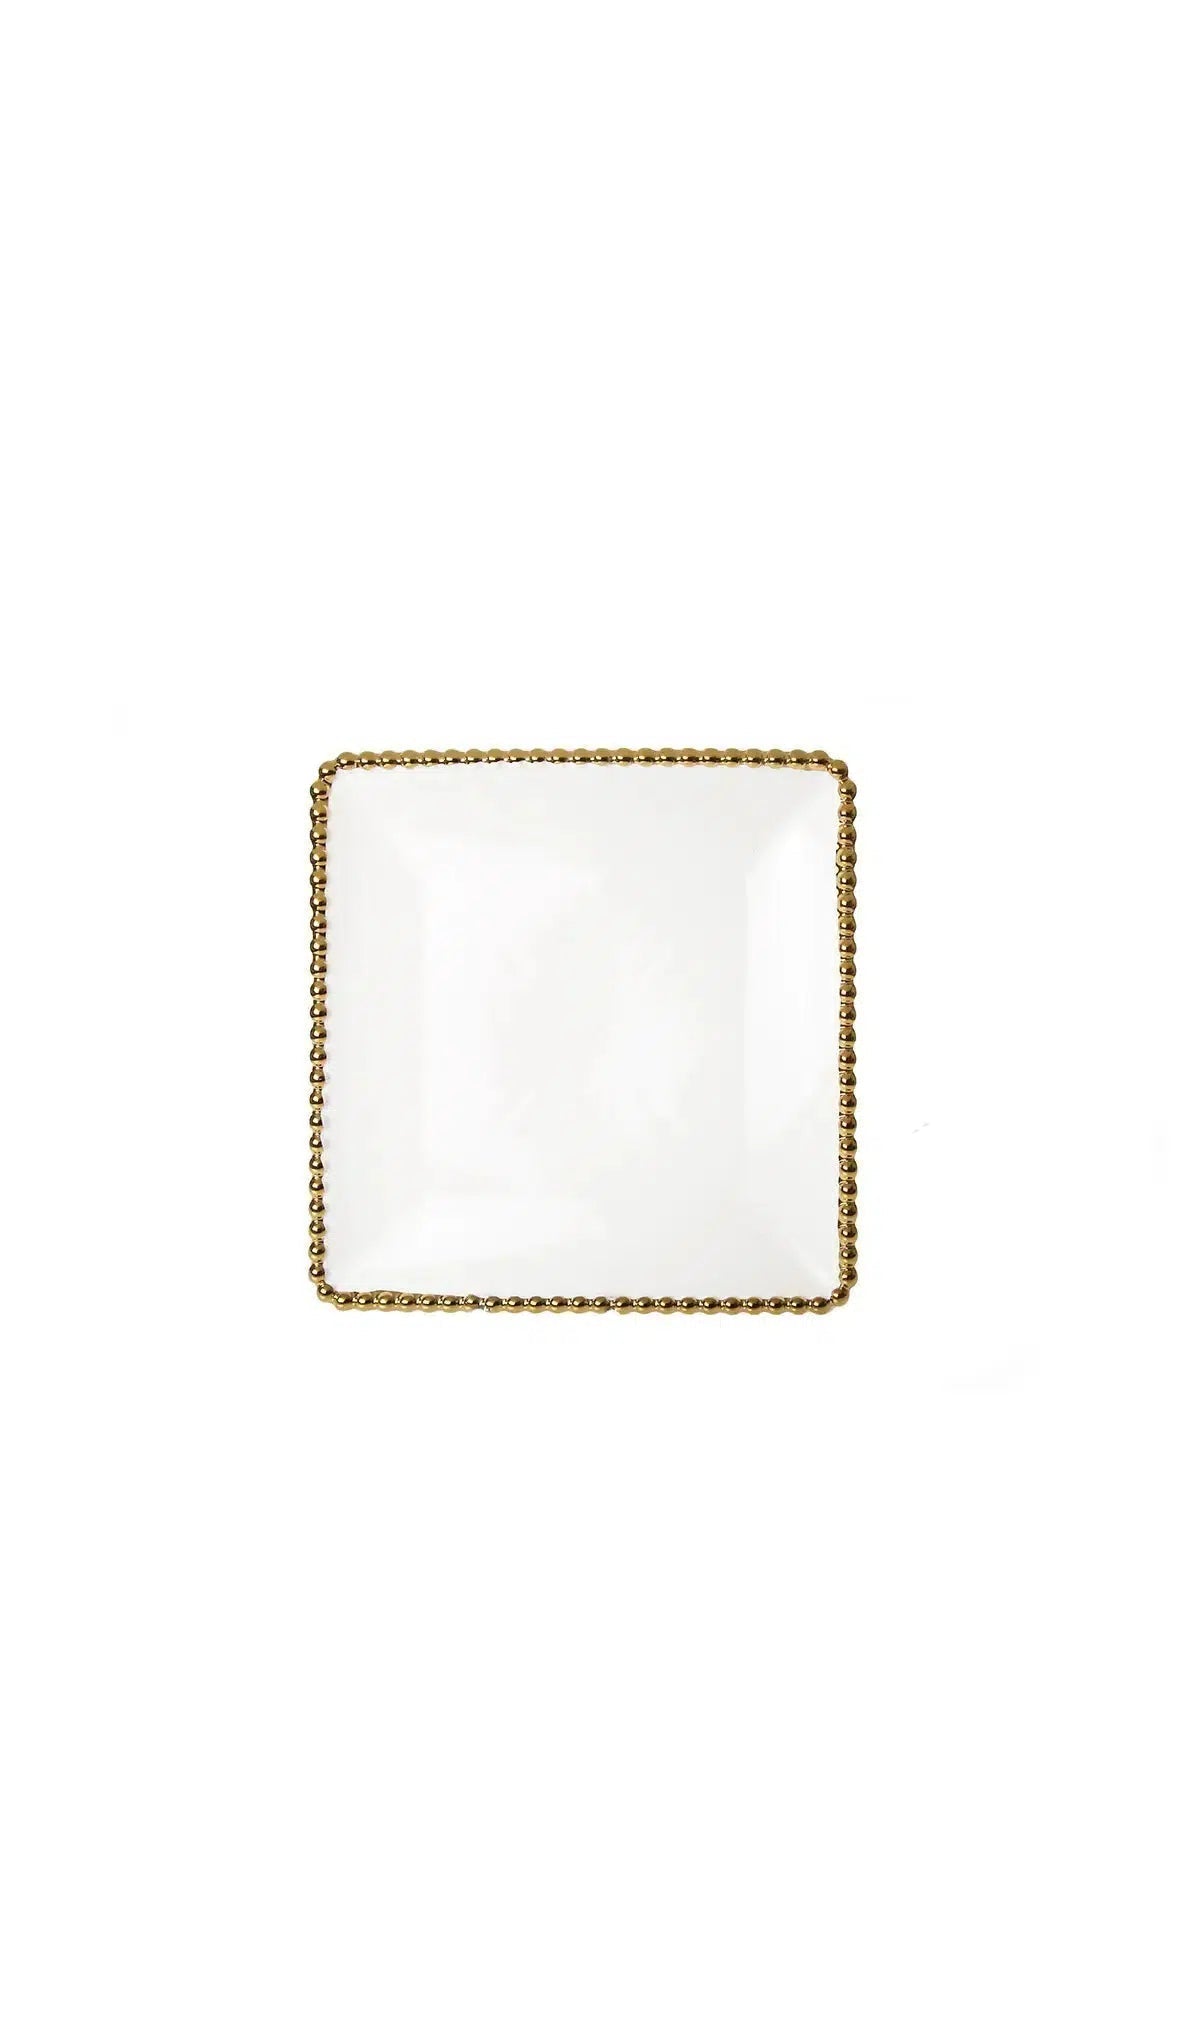 Set Of Four Square Plates With Gold Beaded Design Plates High Class Touch - Home Decor 